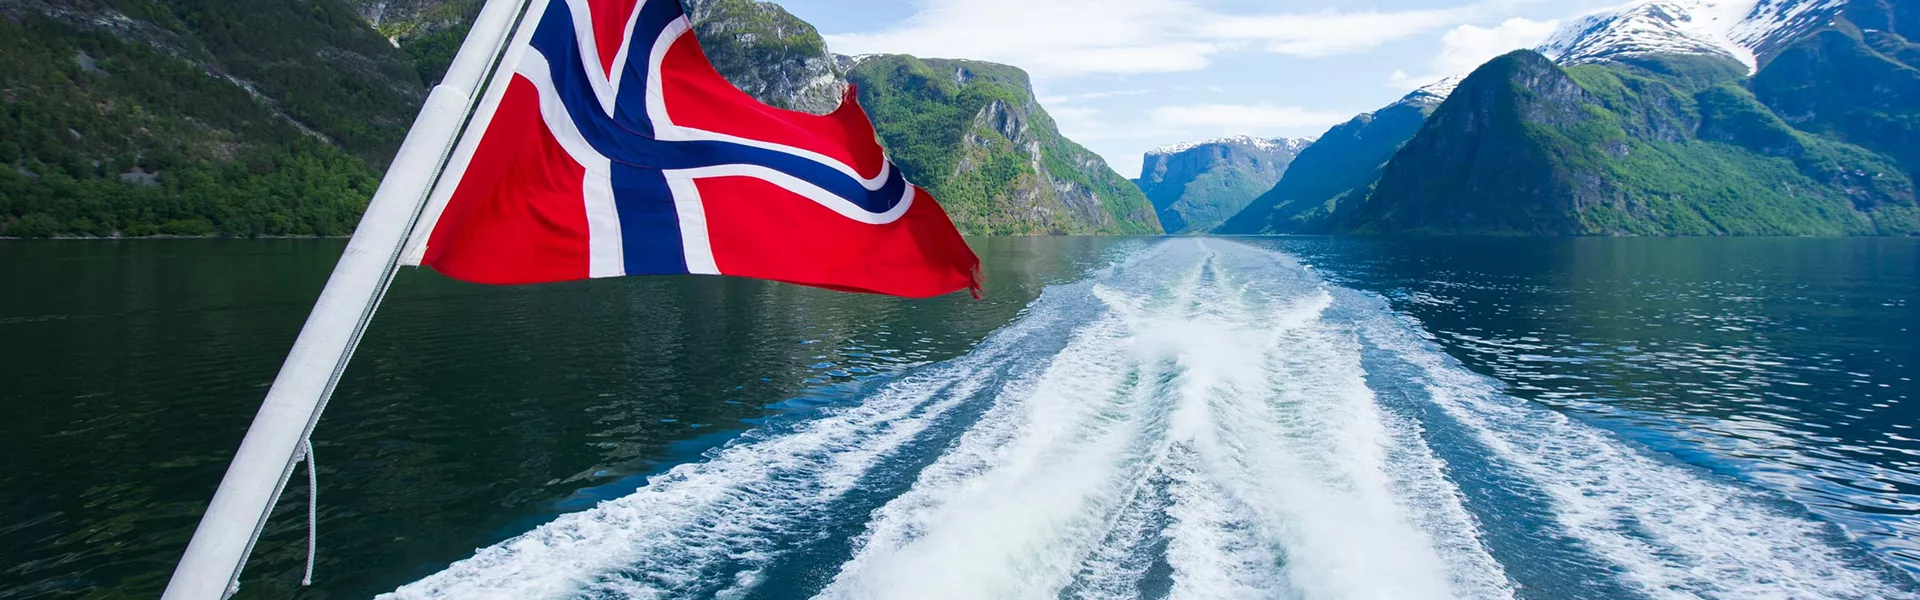 Fjords in Norway from motorboat